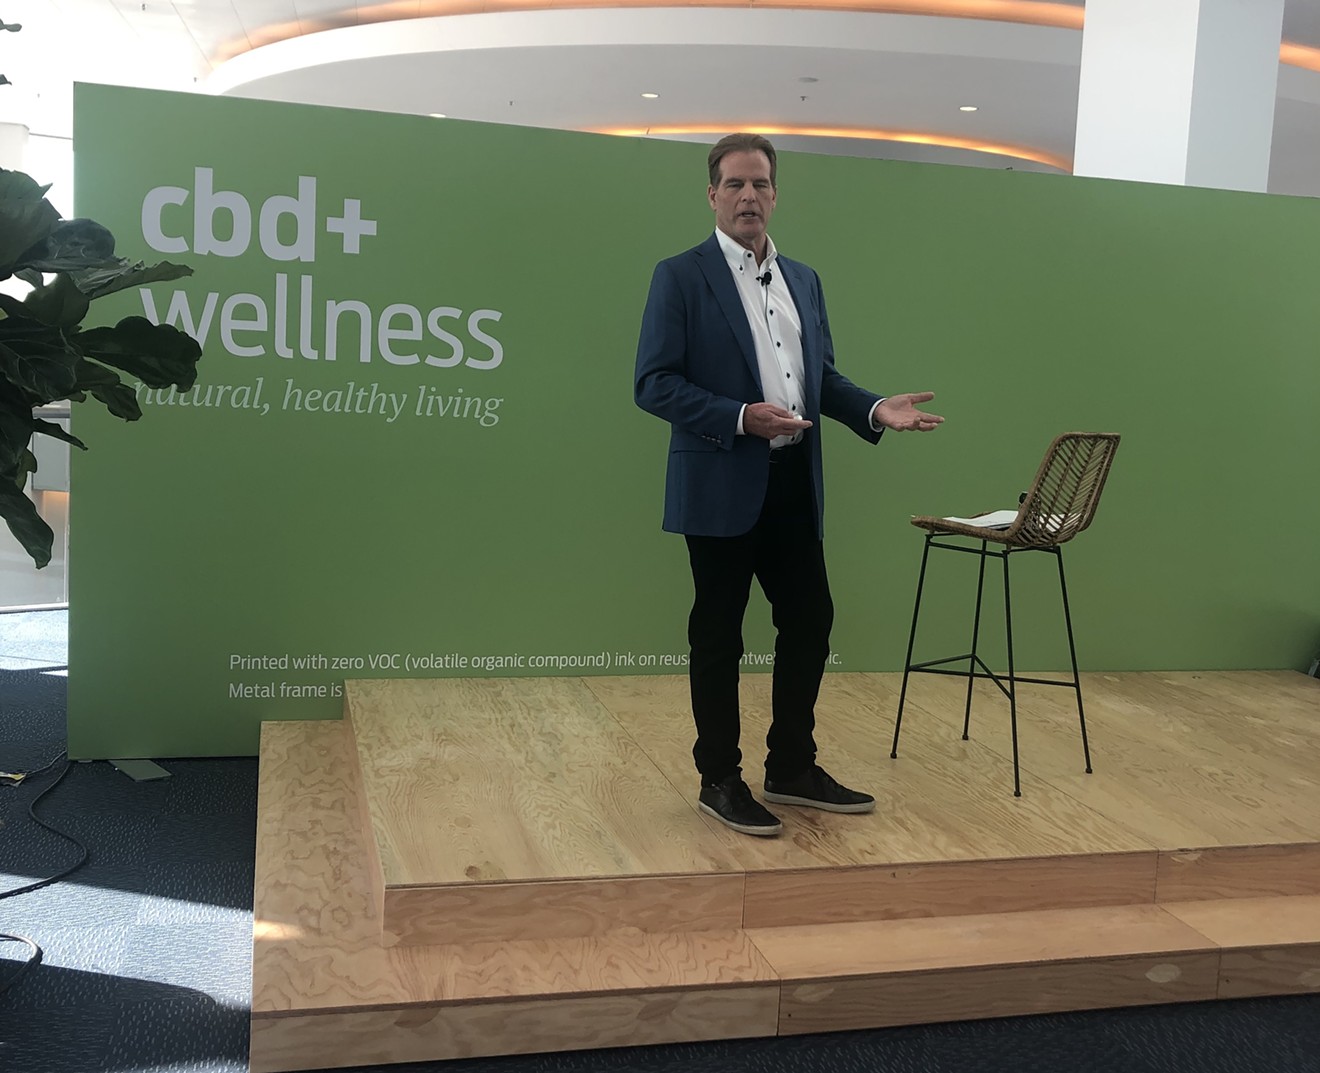 Craig Binkley speaking at the cbd + wellness booth at the 2020 Outdoor Retailer Outdoor + Snow Show.